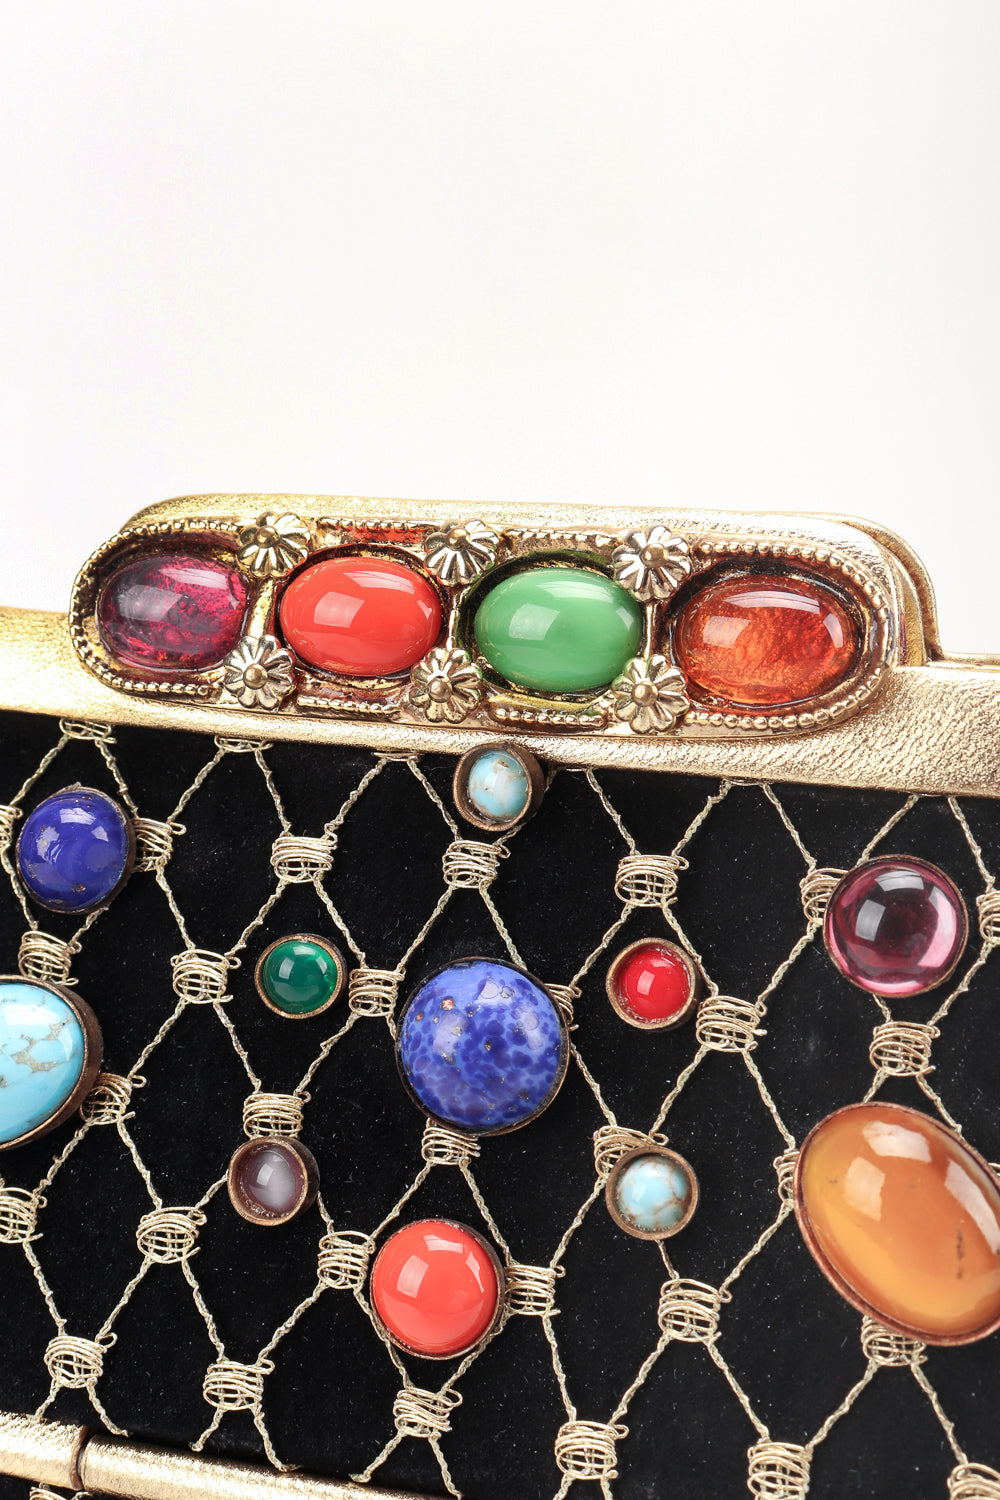 Recess Los Angeles Designer Consignment Resale Recycled Vintage Helene Angeli Royal Jeweled Box Bag